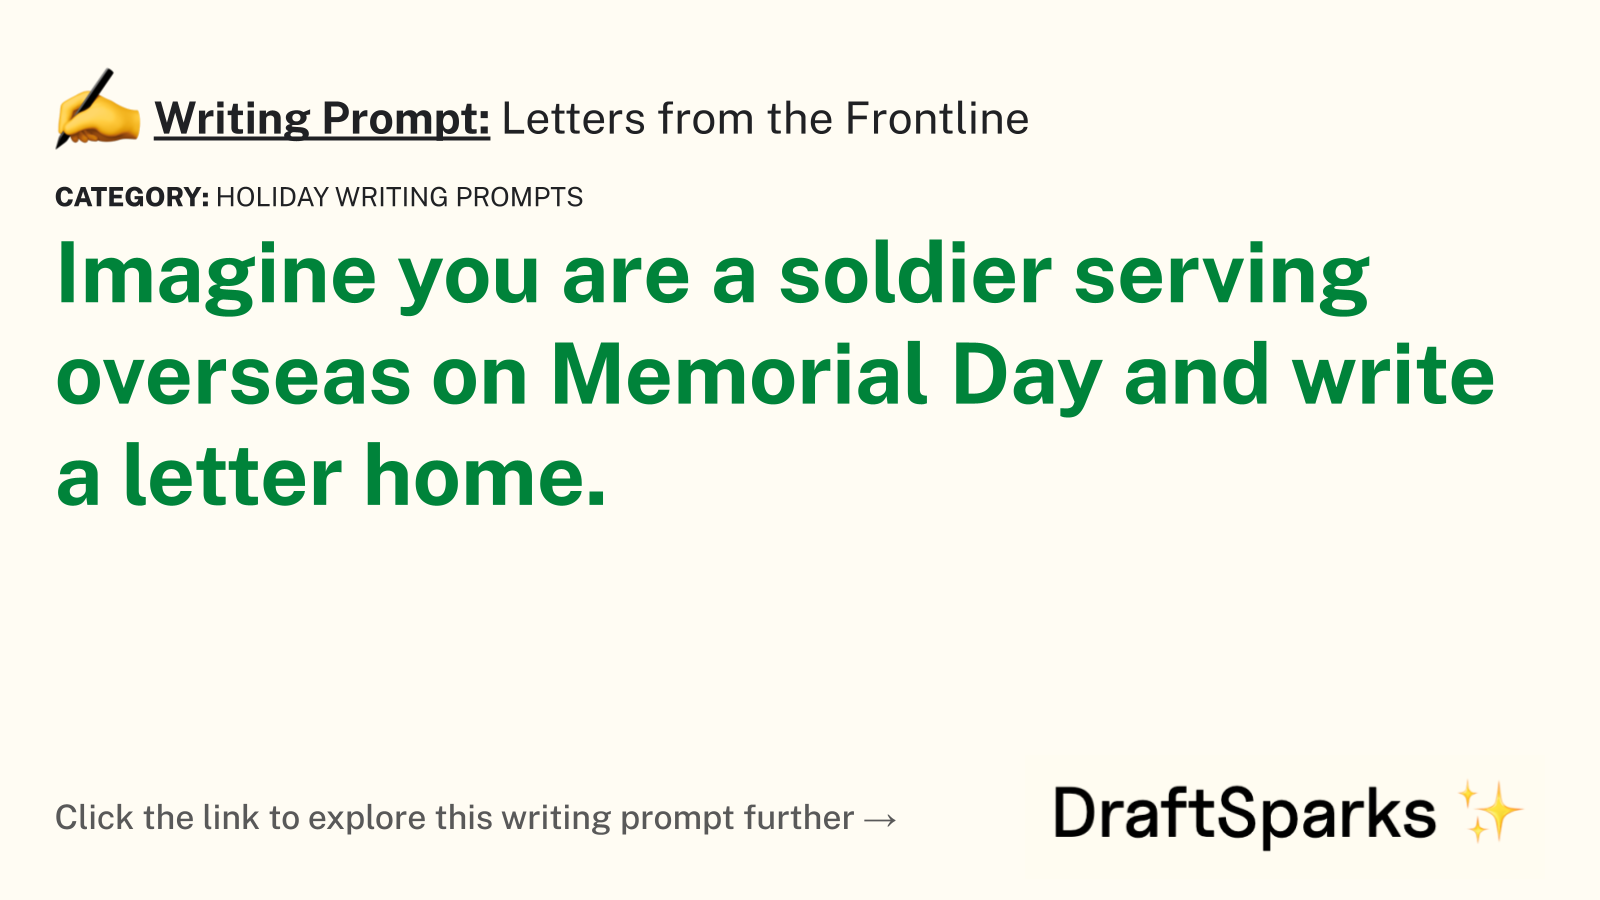 Letters from the Frontline